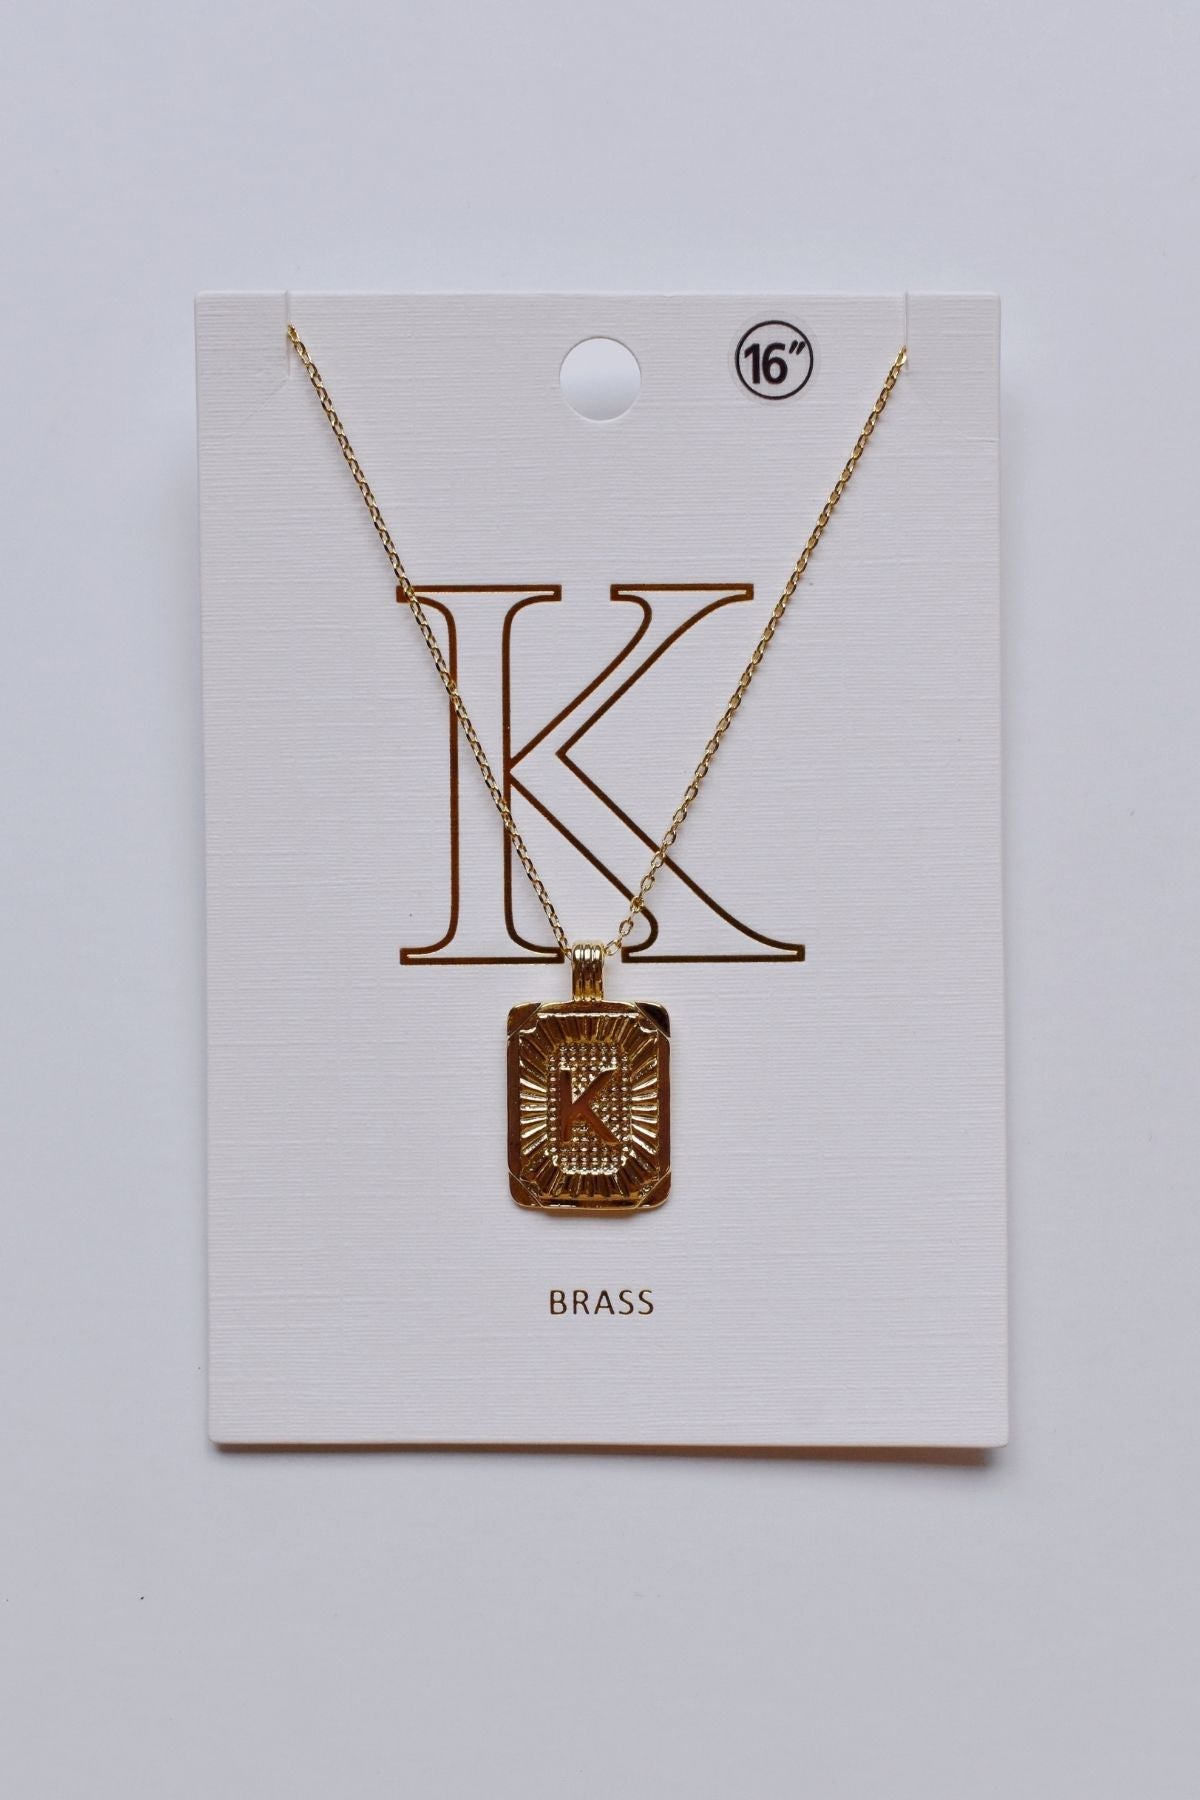 Gold Initial Rectangle Necklace